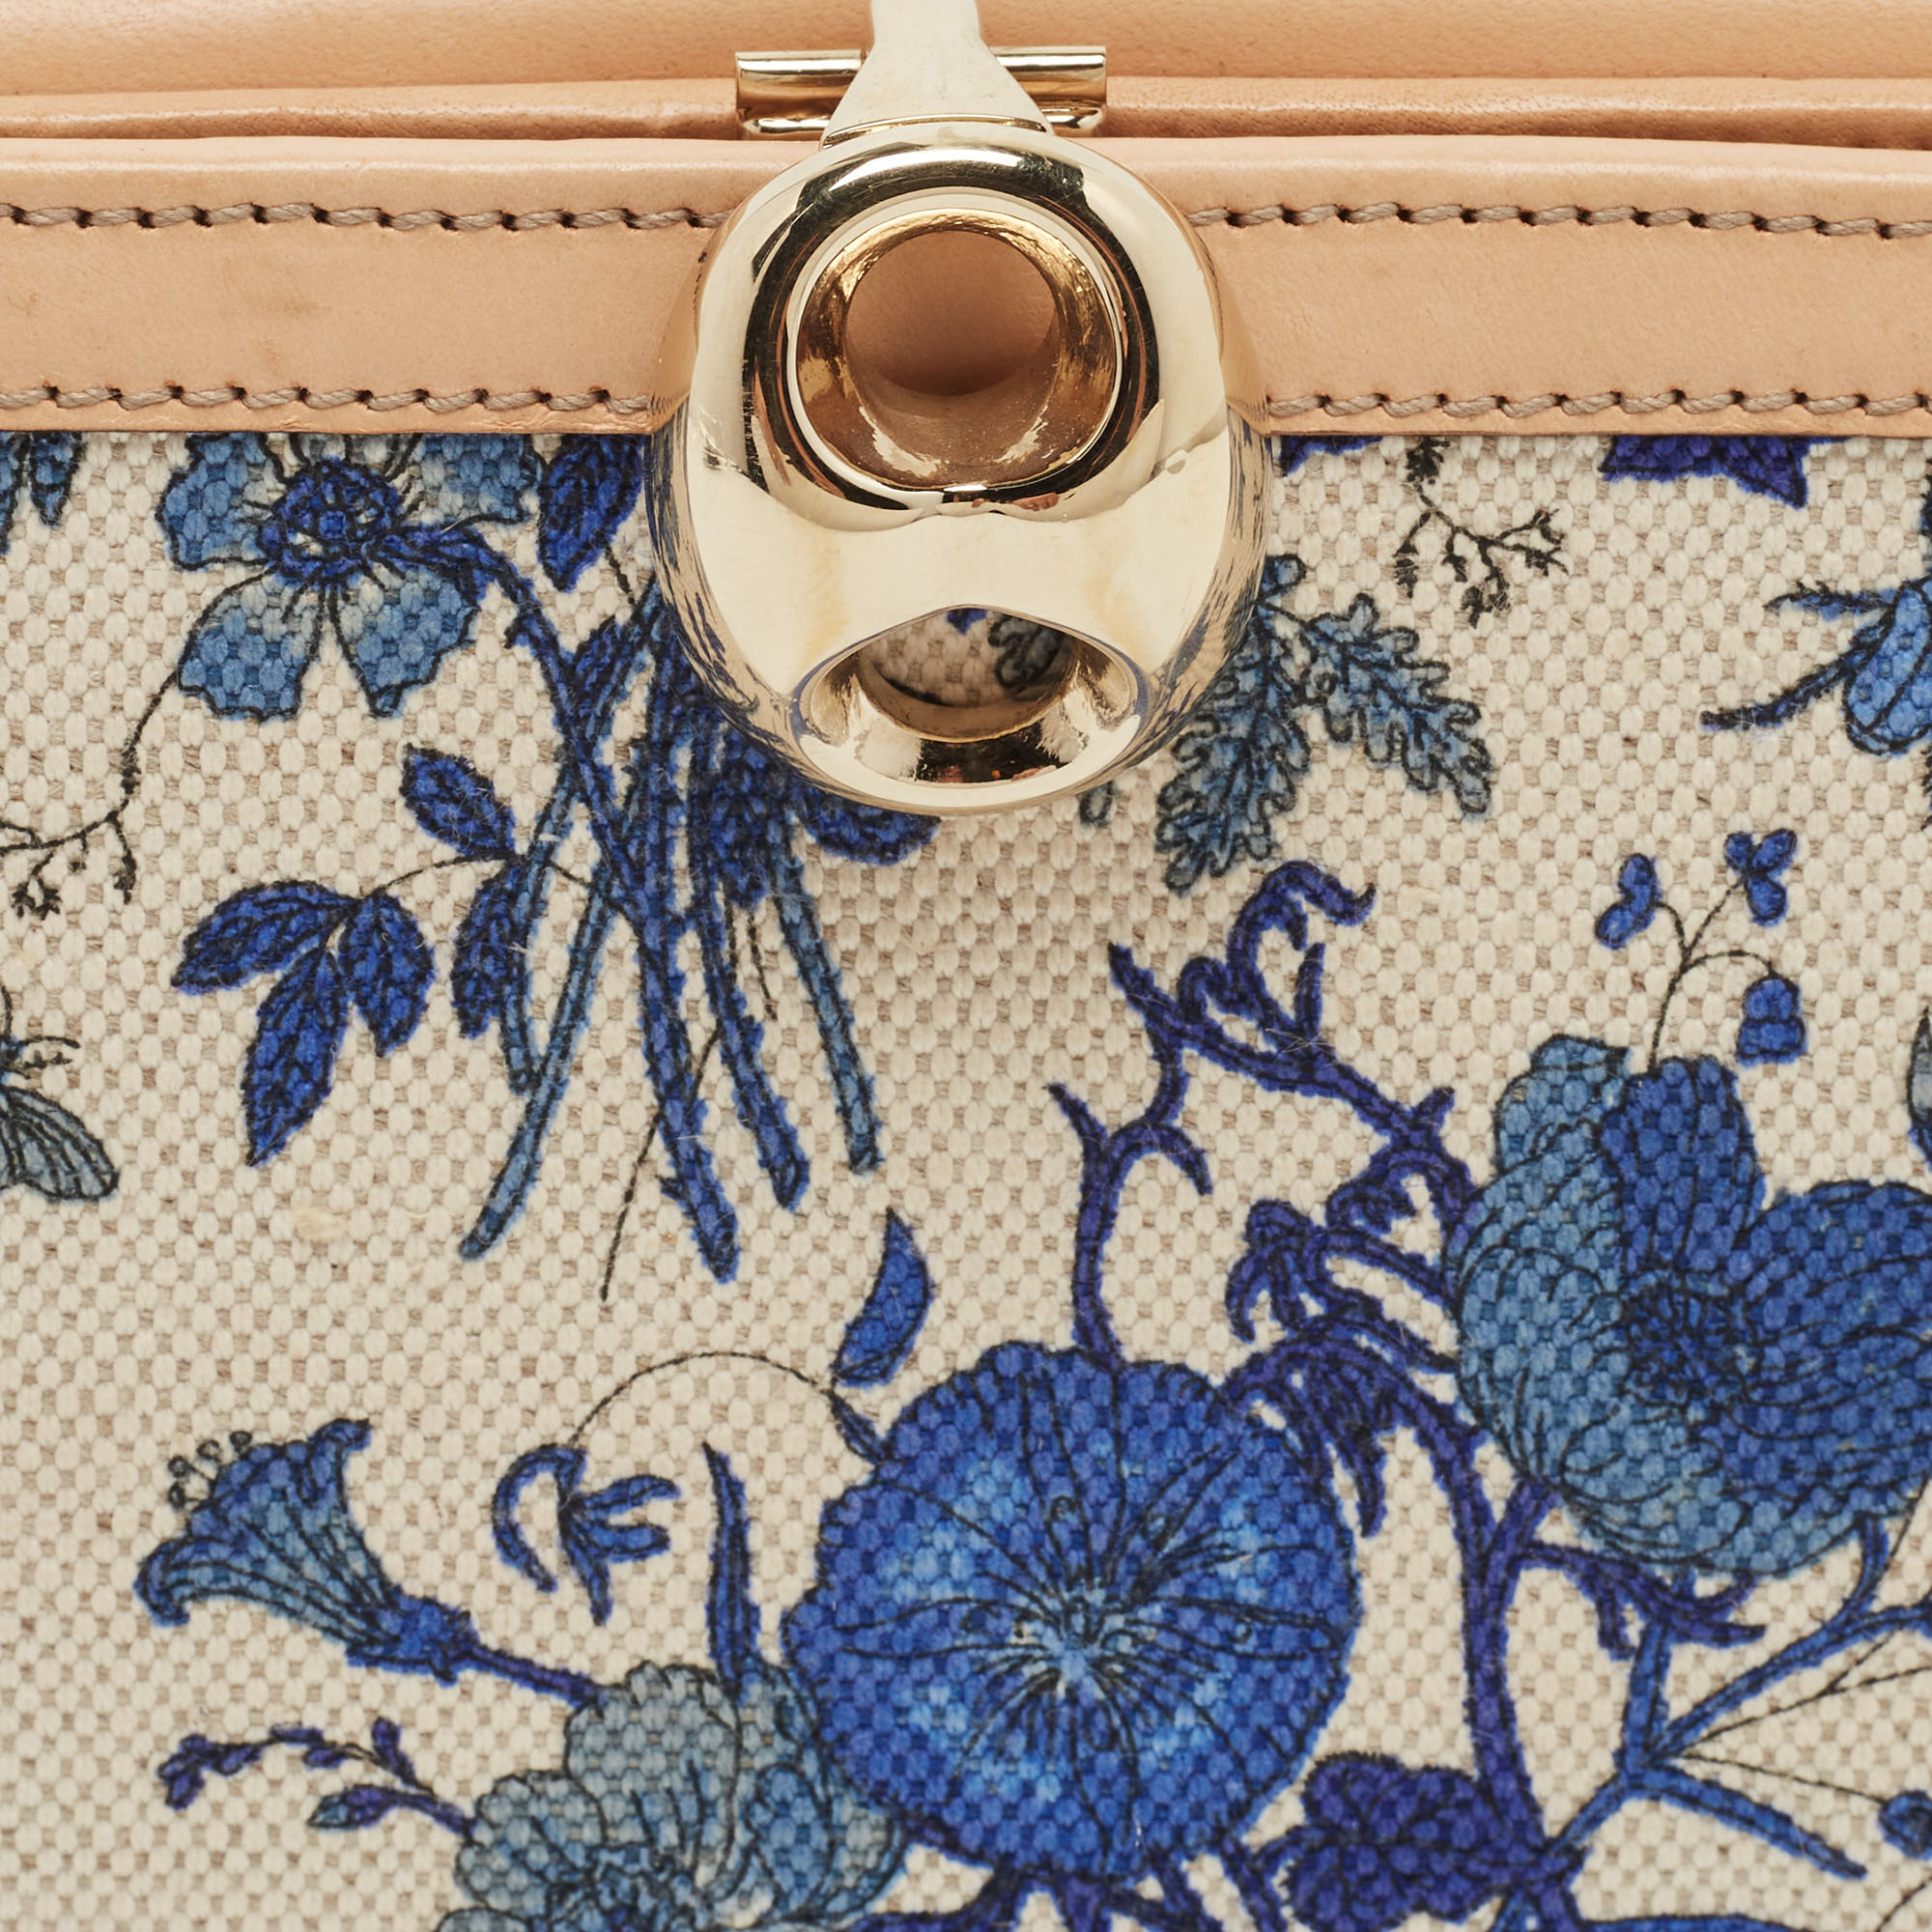 Gucci Blue/Beige Floral Print Canvas And Leather Wave Continental Wallet